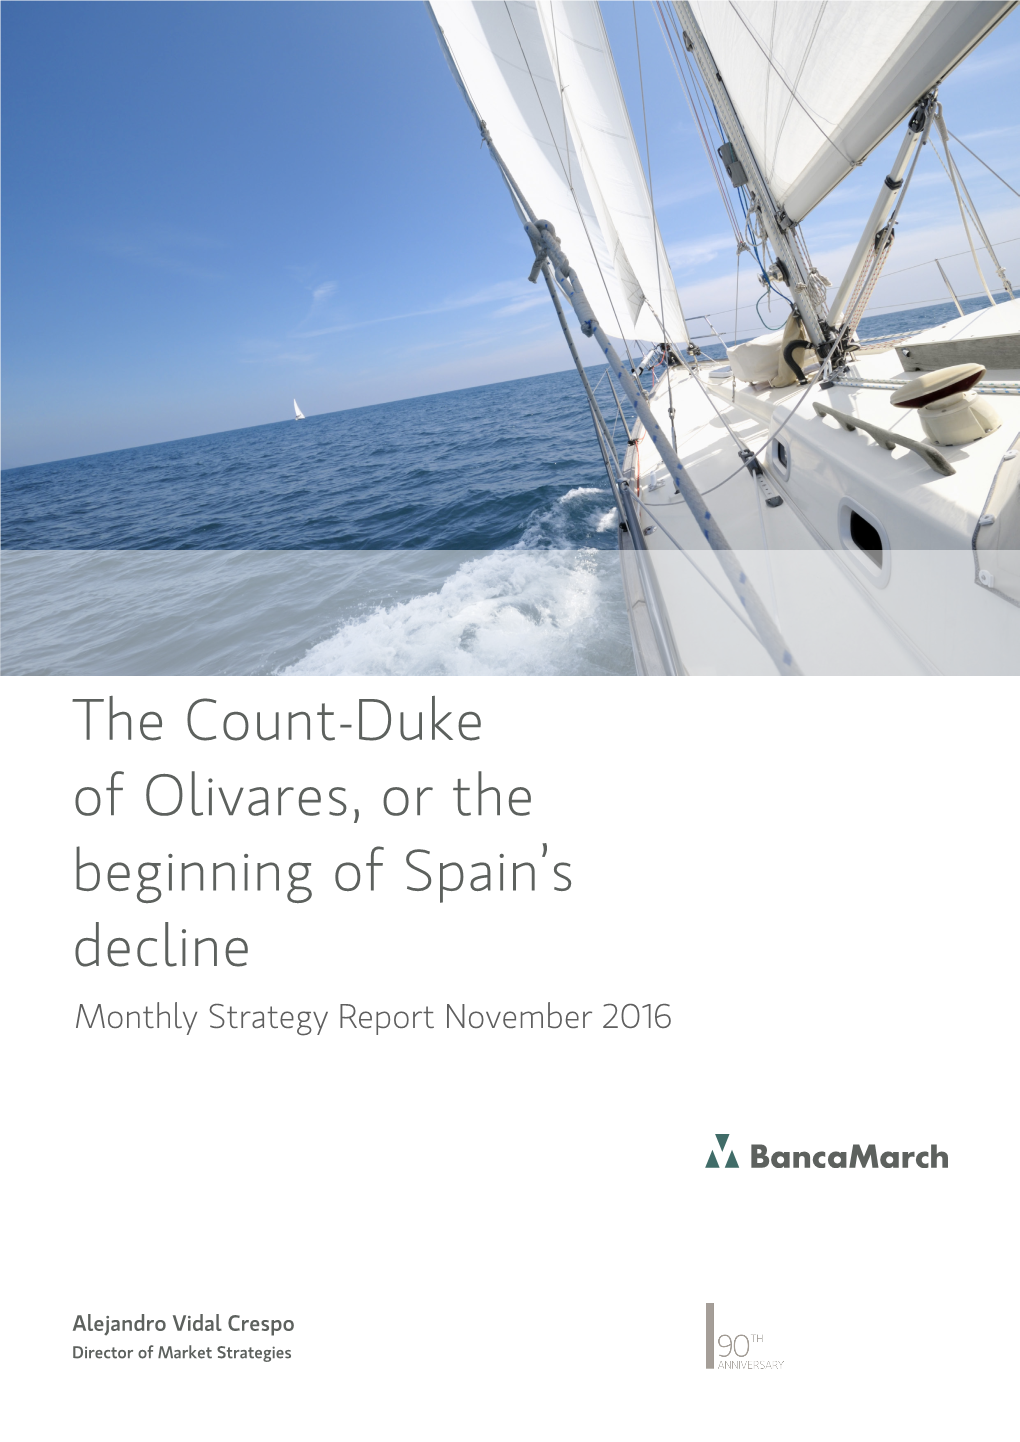 The Count-Duke of Olivares, Or the Beginning of Spain's Declive